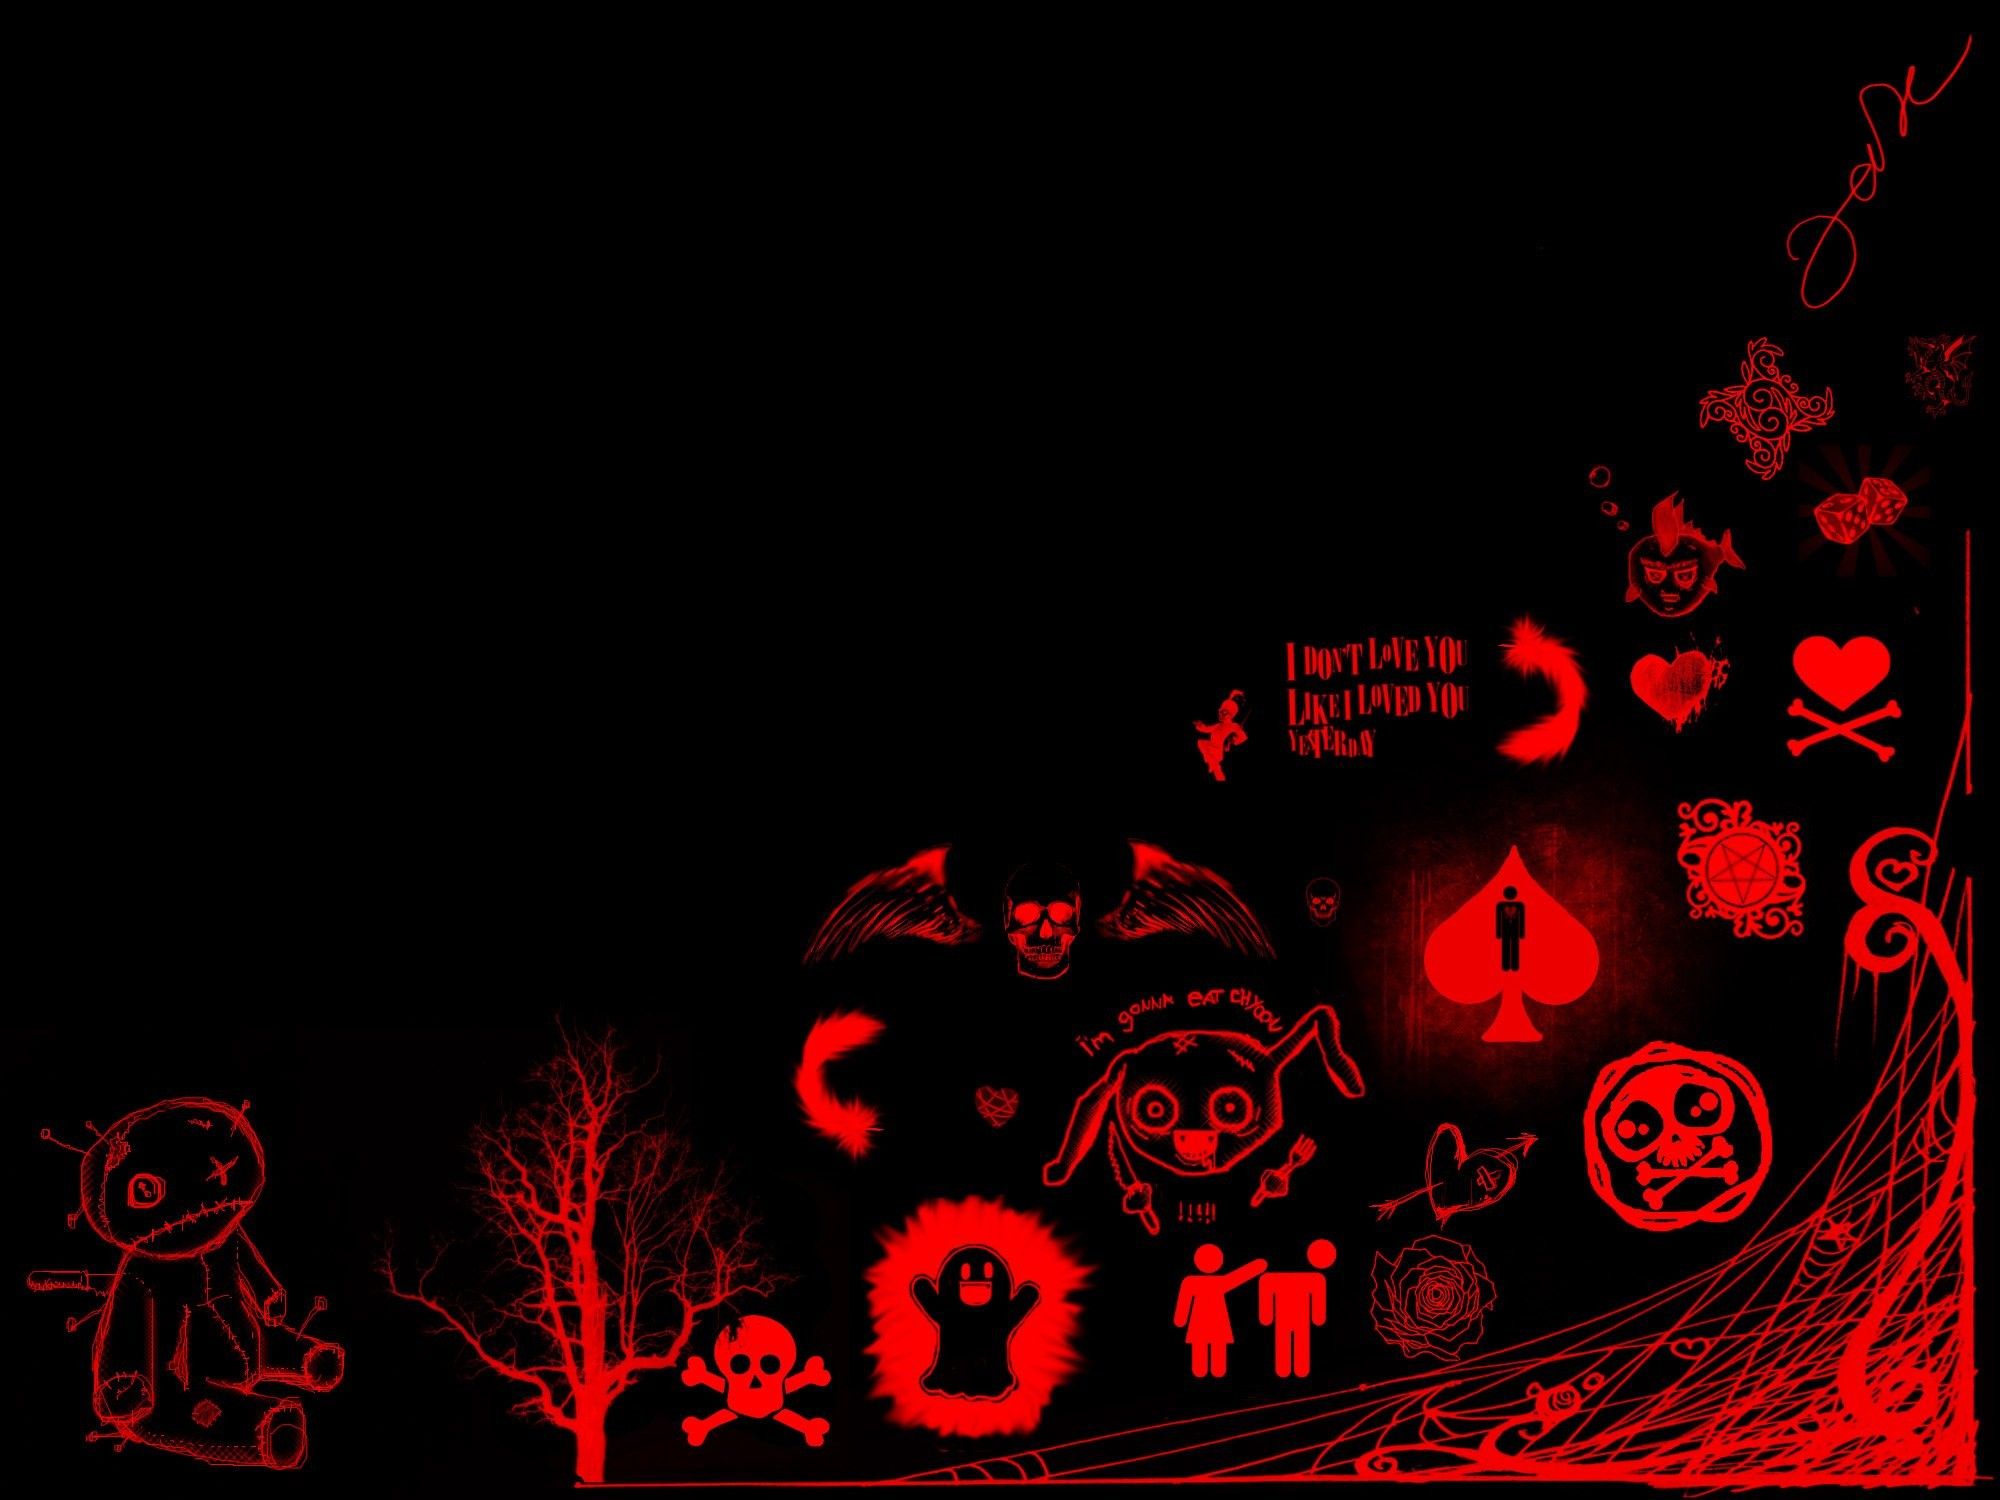 Black and red emo wallpaper with red symbols on a black background - Gothic, emo